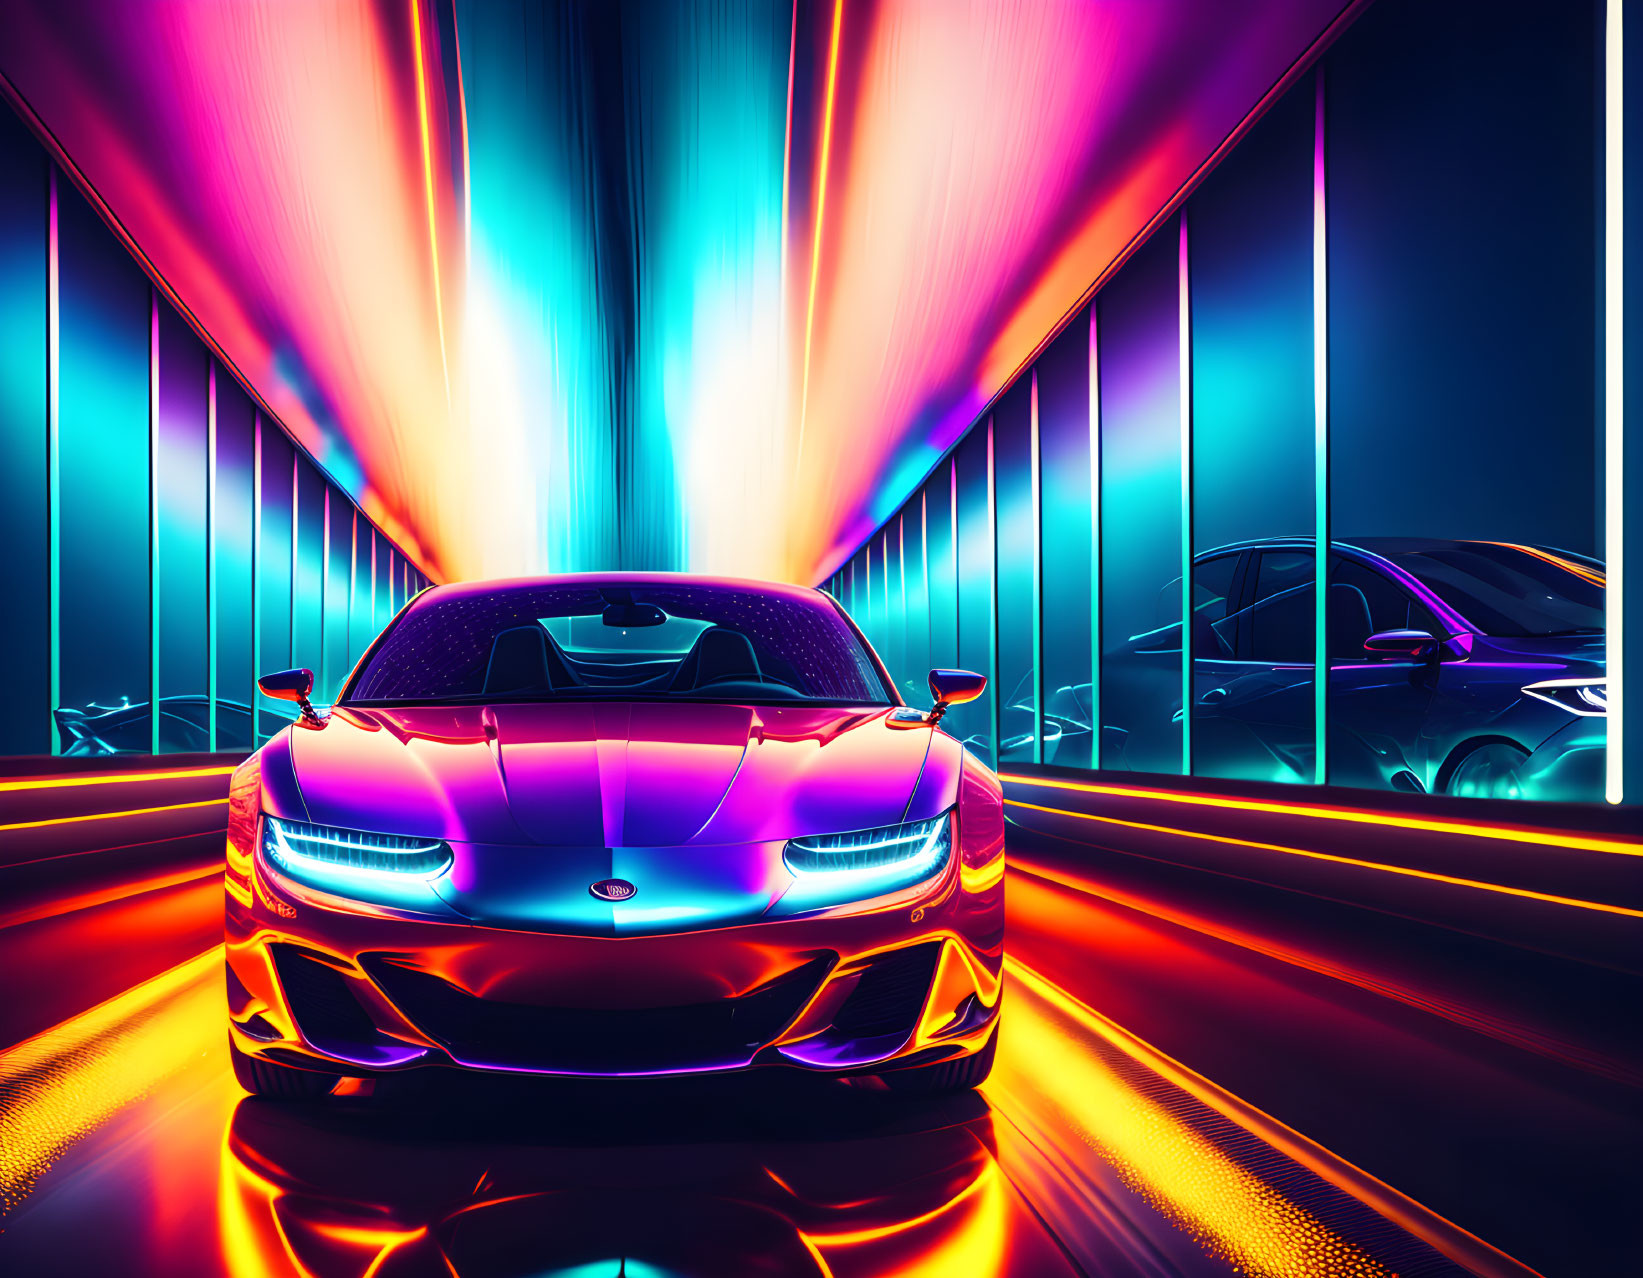 Colorful digital art of sports car with neon lights and dynamic streaks.